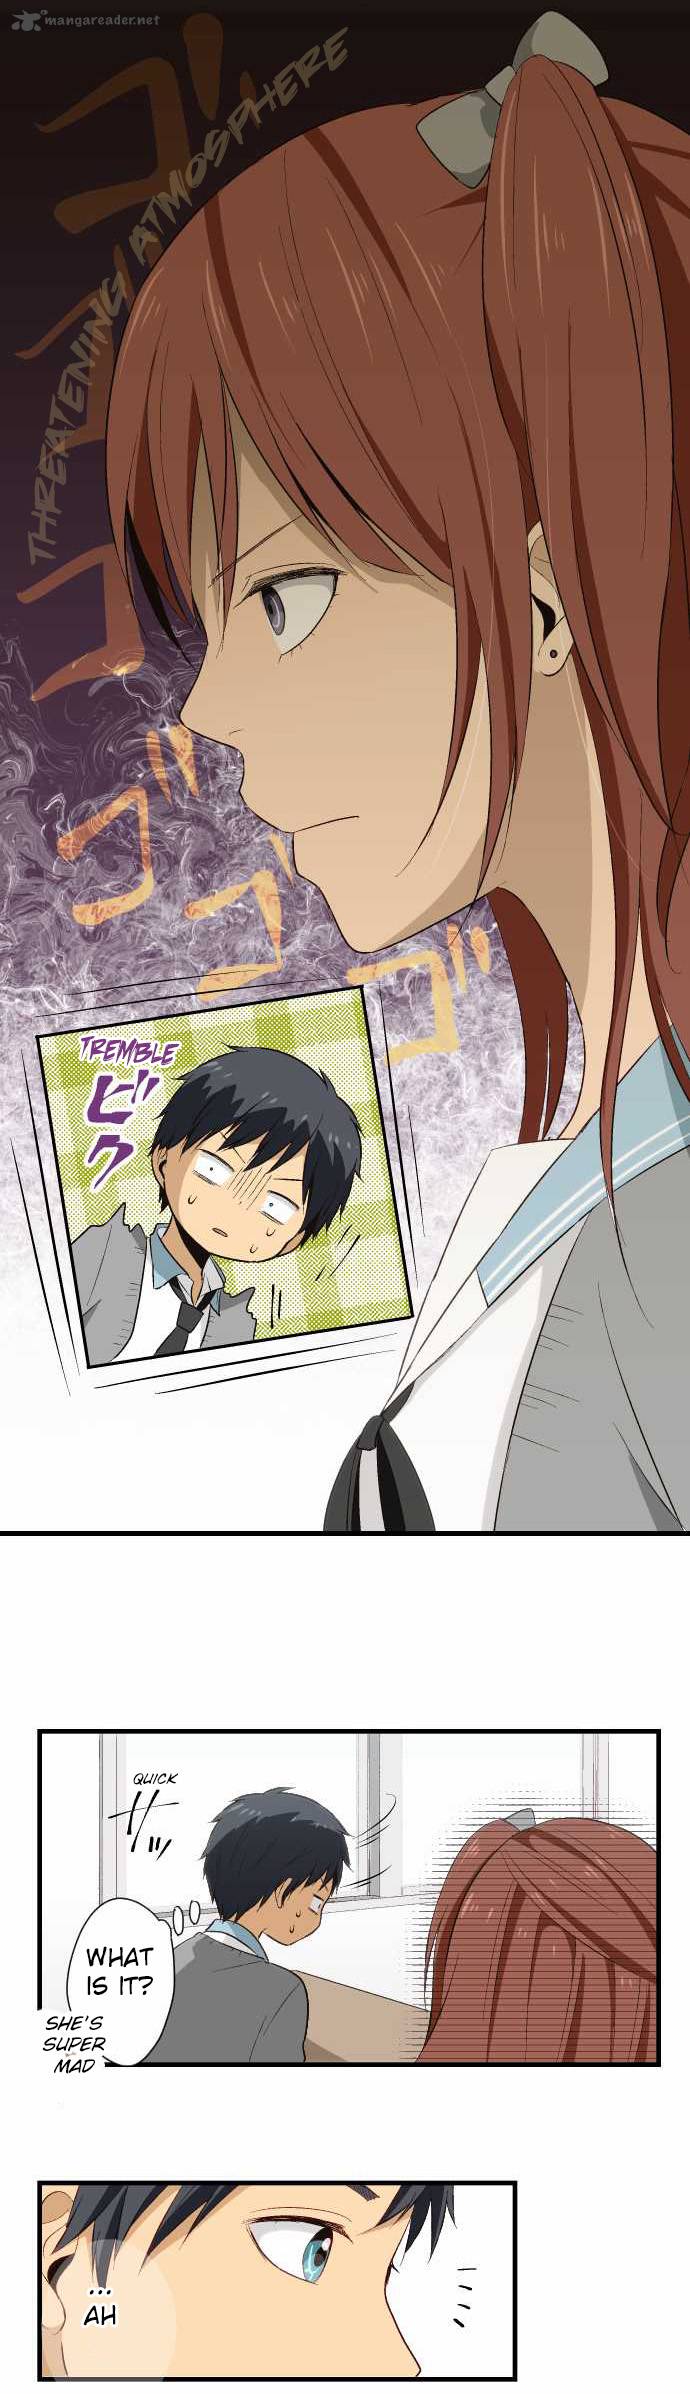 Relife 20 18